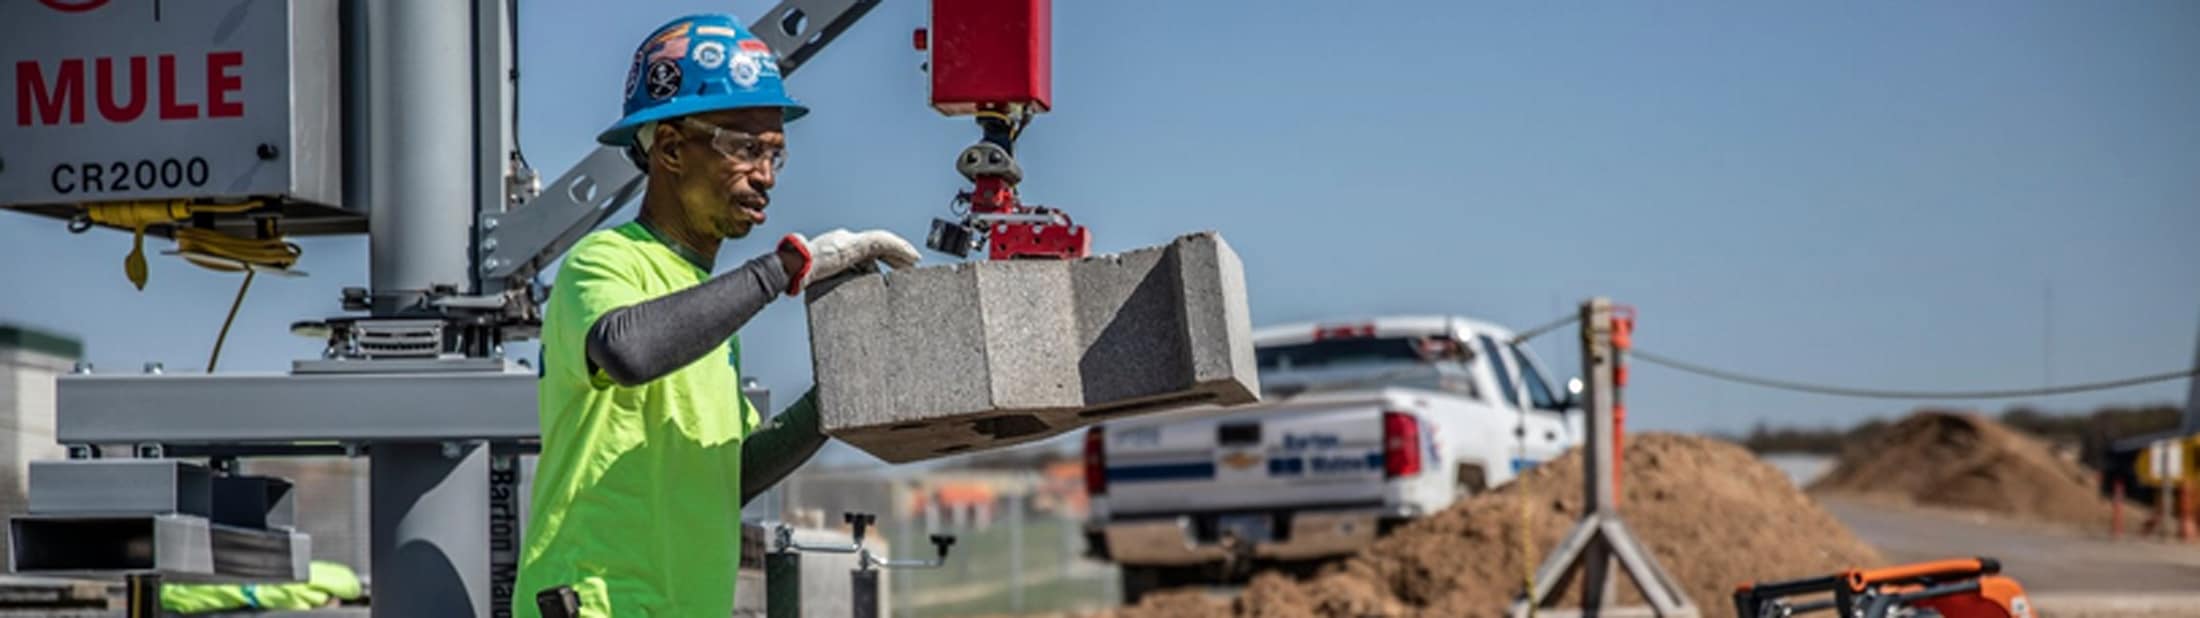 Barton Malow already uses simple robots on some job sites, such as the MULE, which helps workers place retaining wall block. The firm is a collaborator on a $2M, U-M led project that aims to enable robots to learn from and cooperate with human construction workers. Photo: Construction Robotics